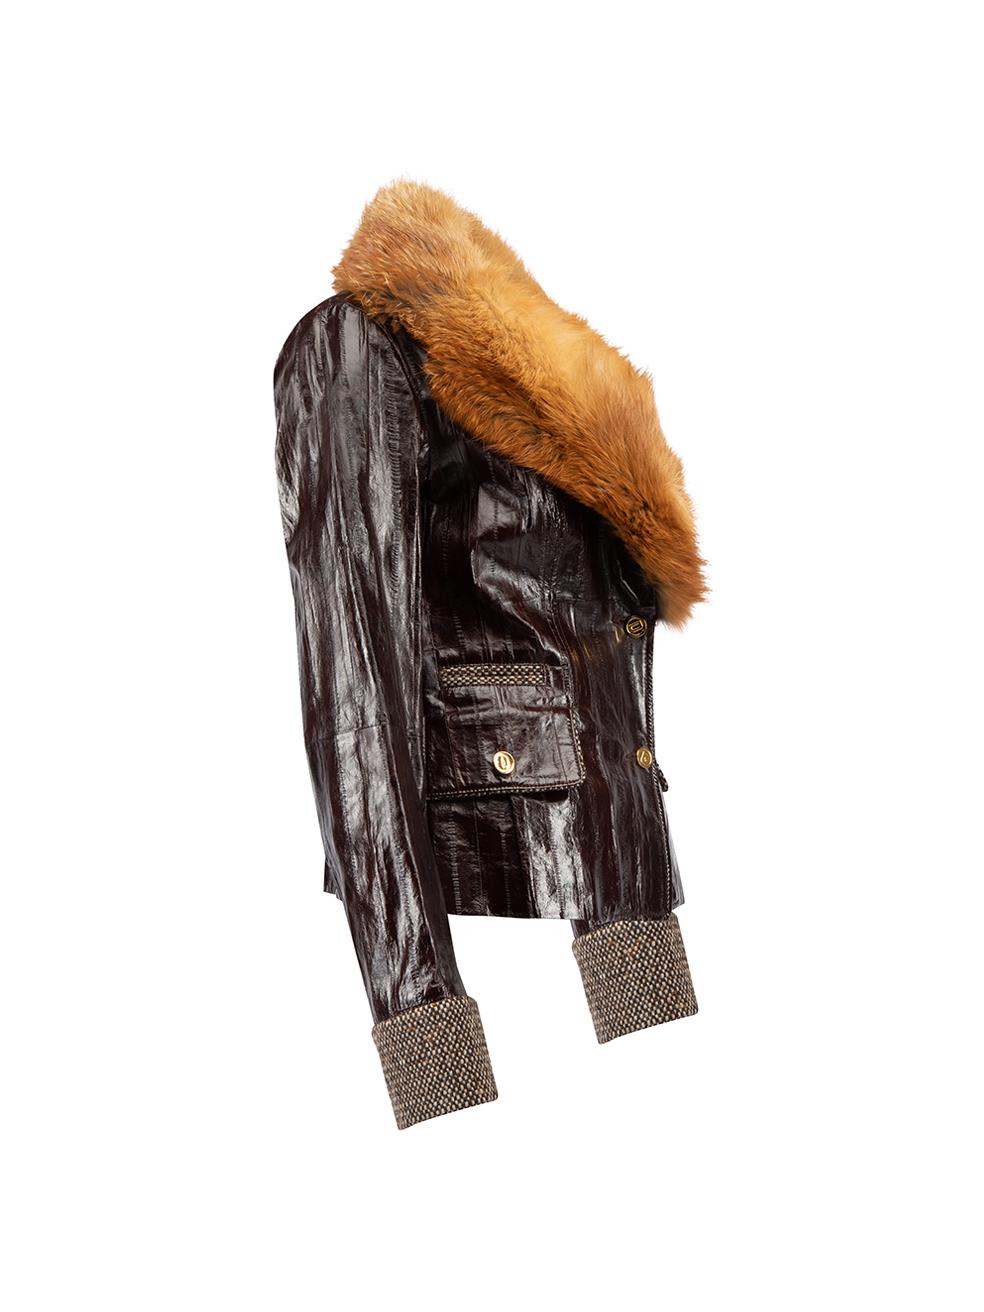 CONDITION is Very good. Minimal wear to jacket is evident. Minimal wear to the leather exterior and a loose thread can be seen on this used Dolce & Gabbana designer resale item. Details Brown Eel leather Fitted jacket Tweed cuffs Fox fur collar